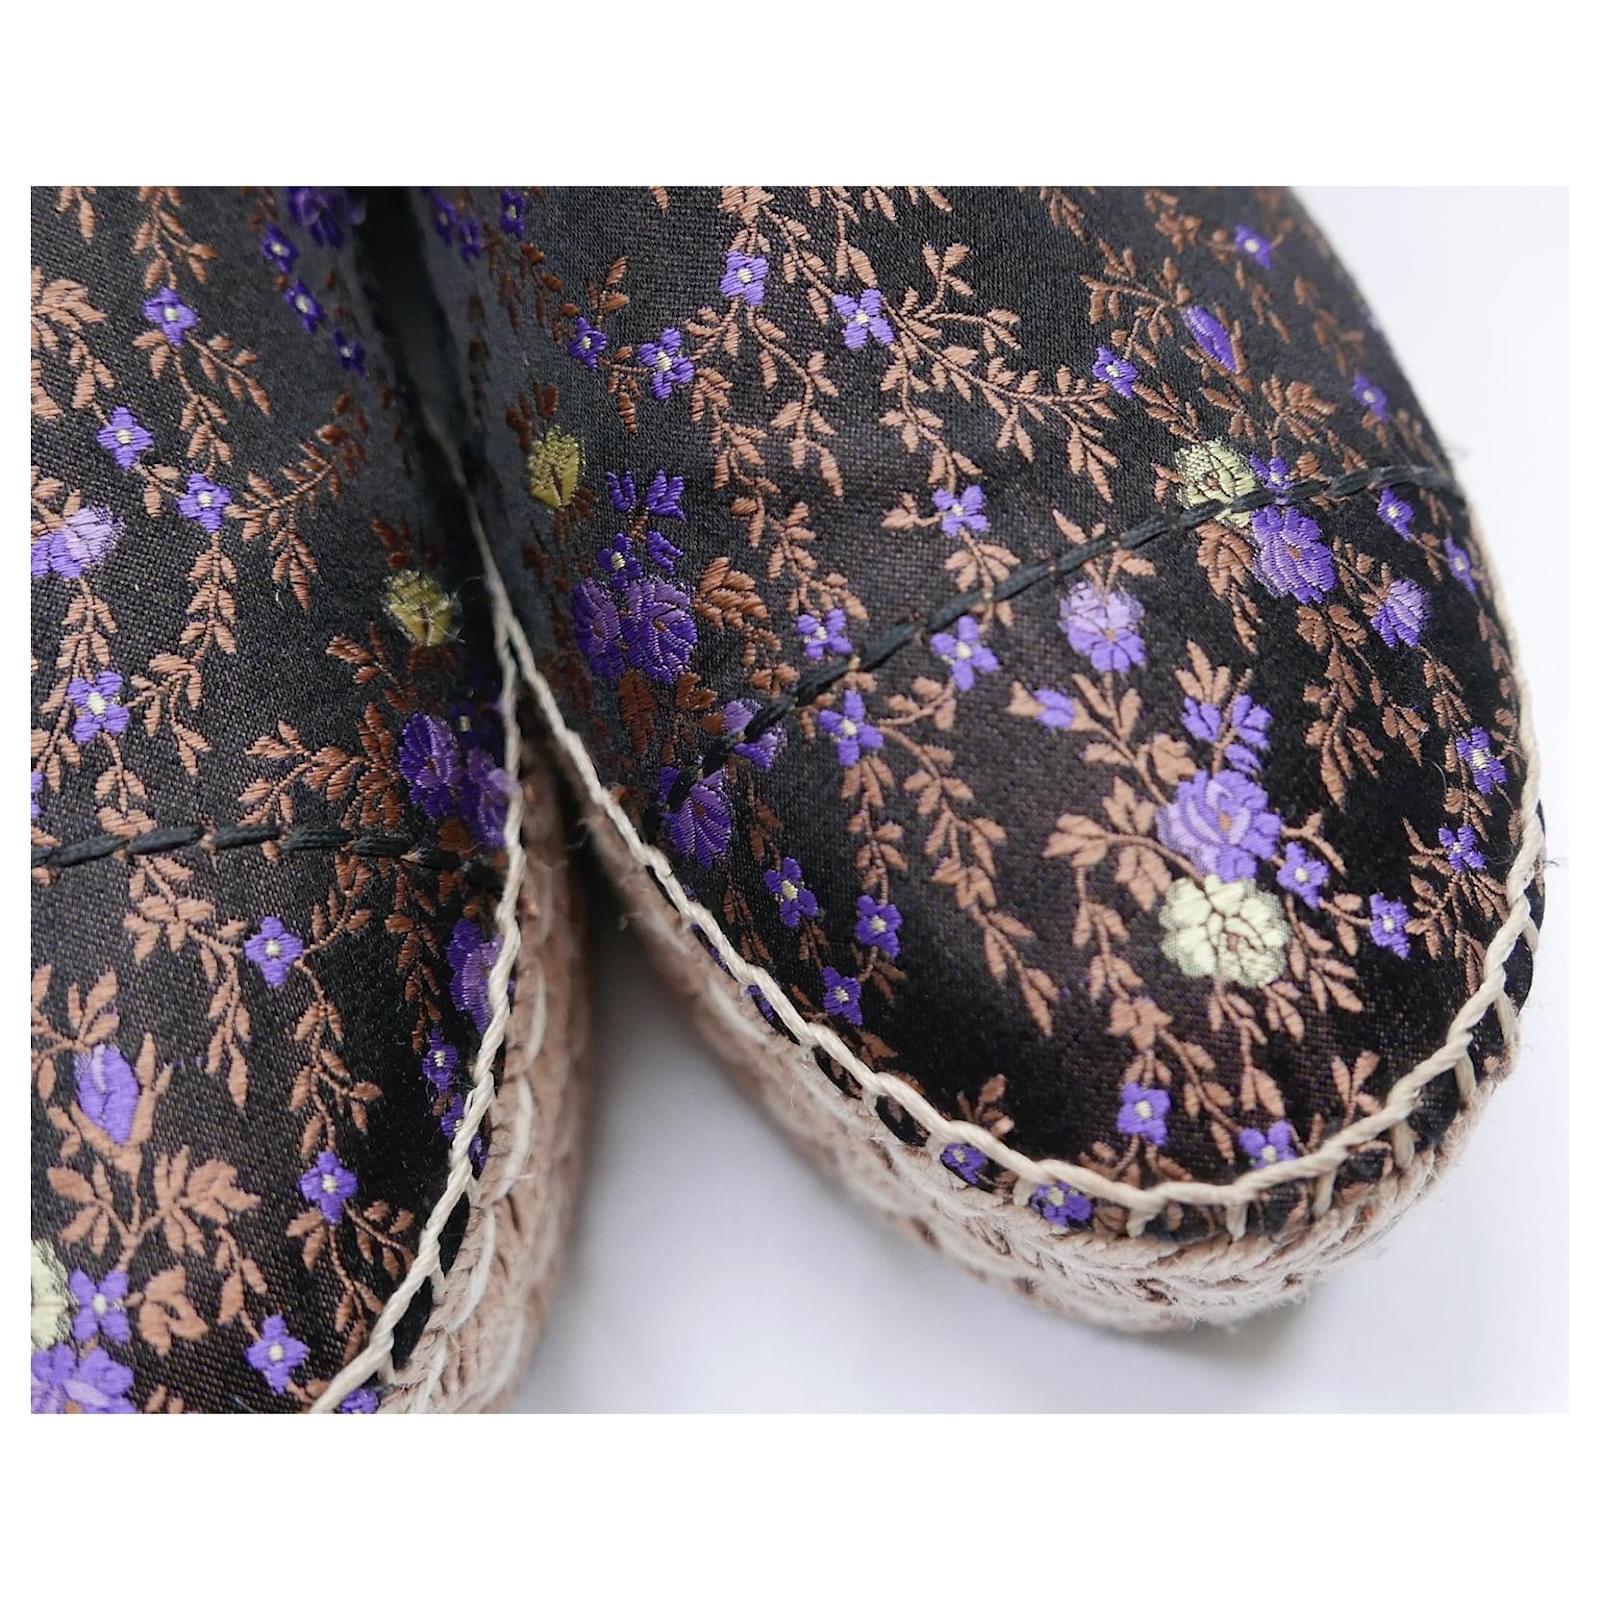 Prada Brocade Platform Espadrilles Shoes In New Condition For Sale In London, GB